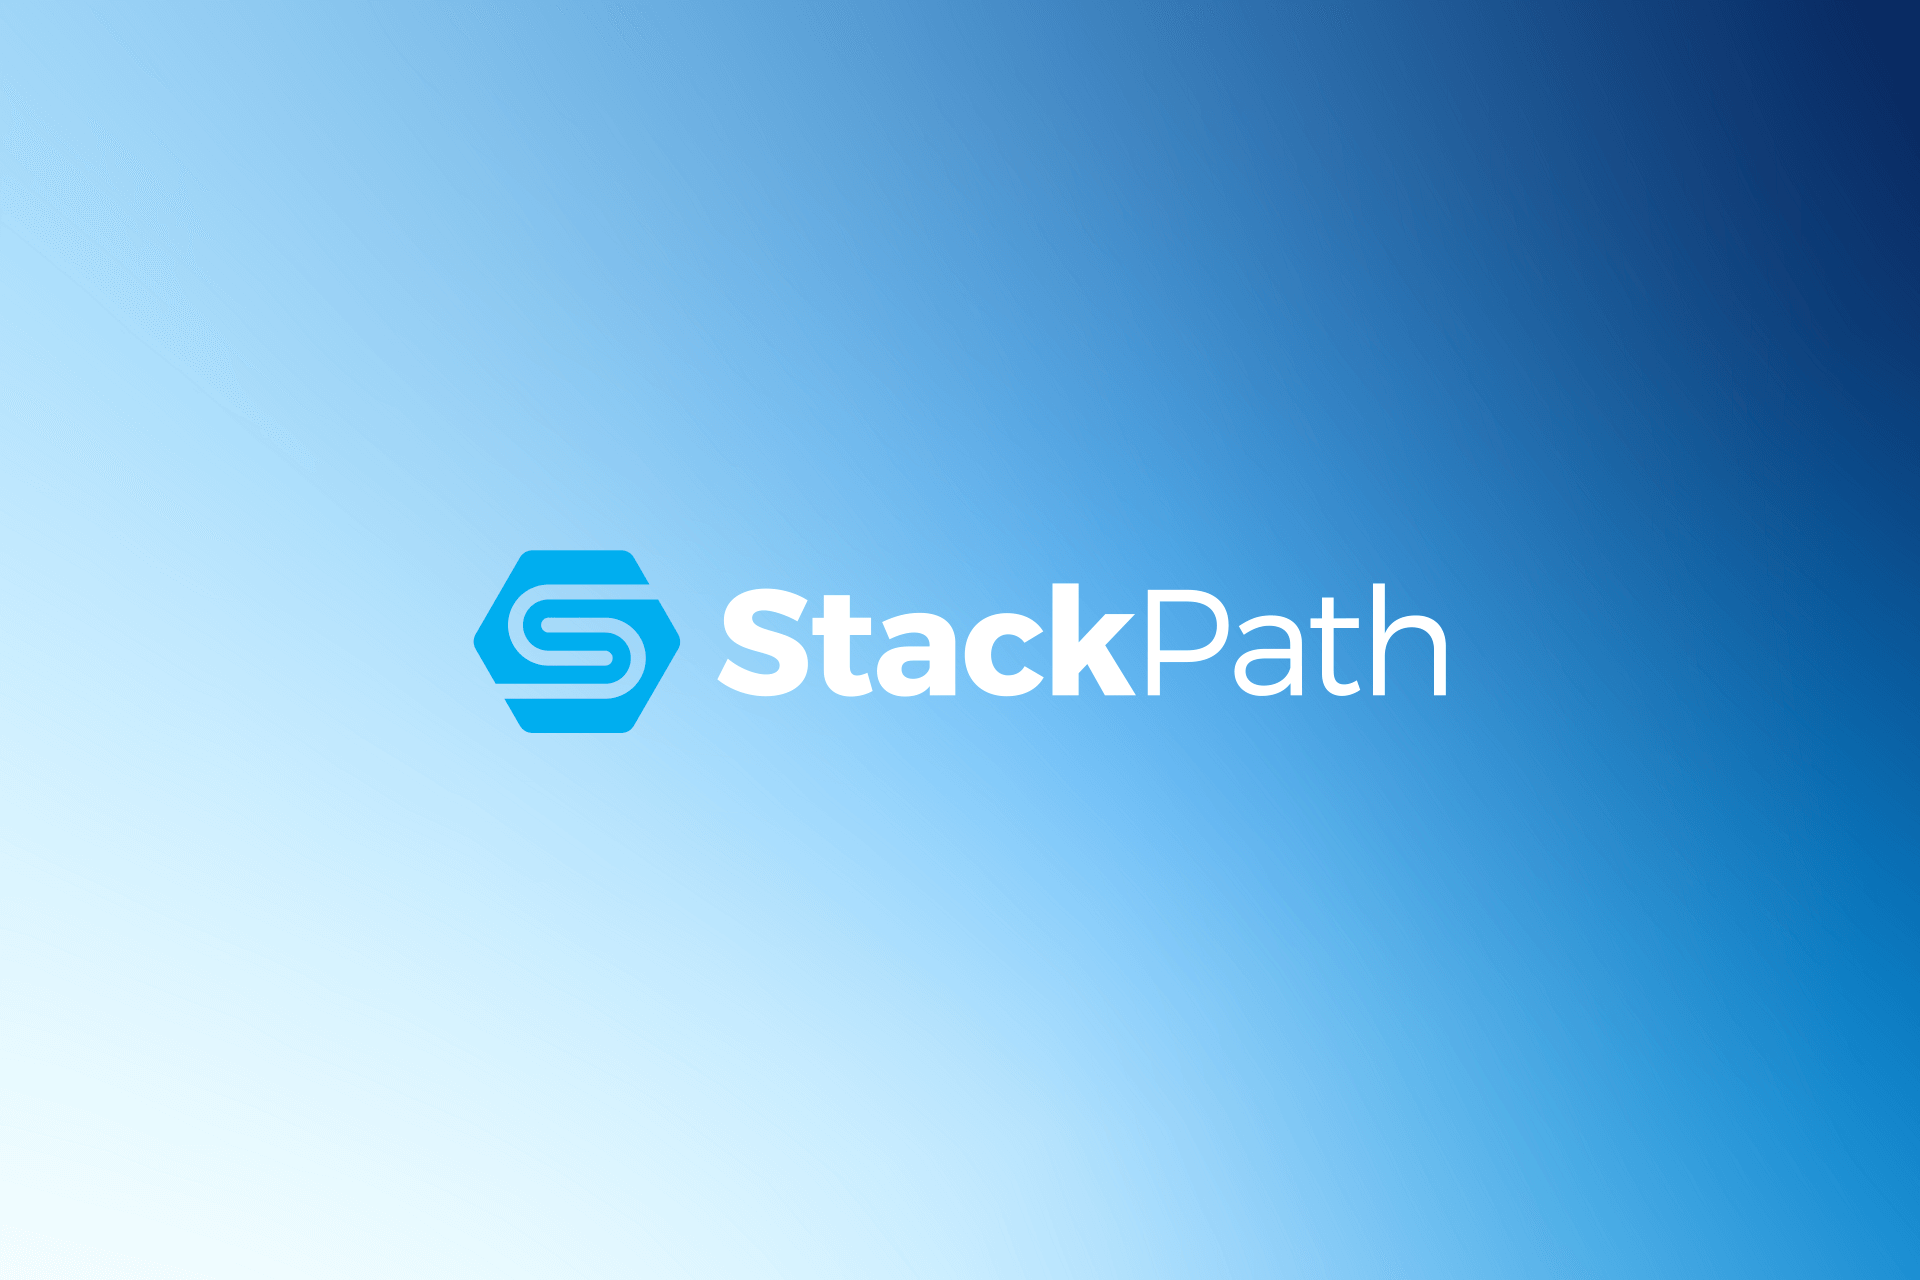 StackPath content delivery network